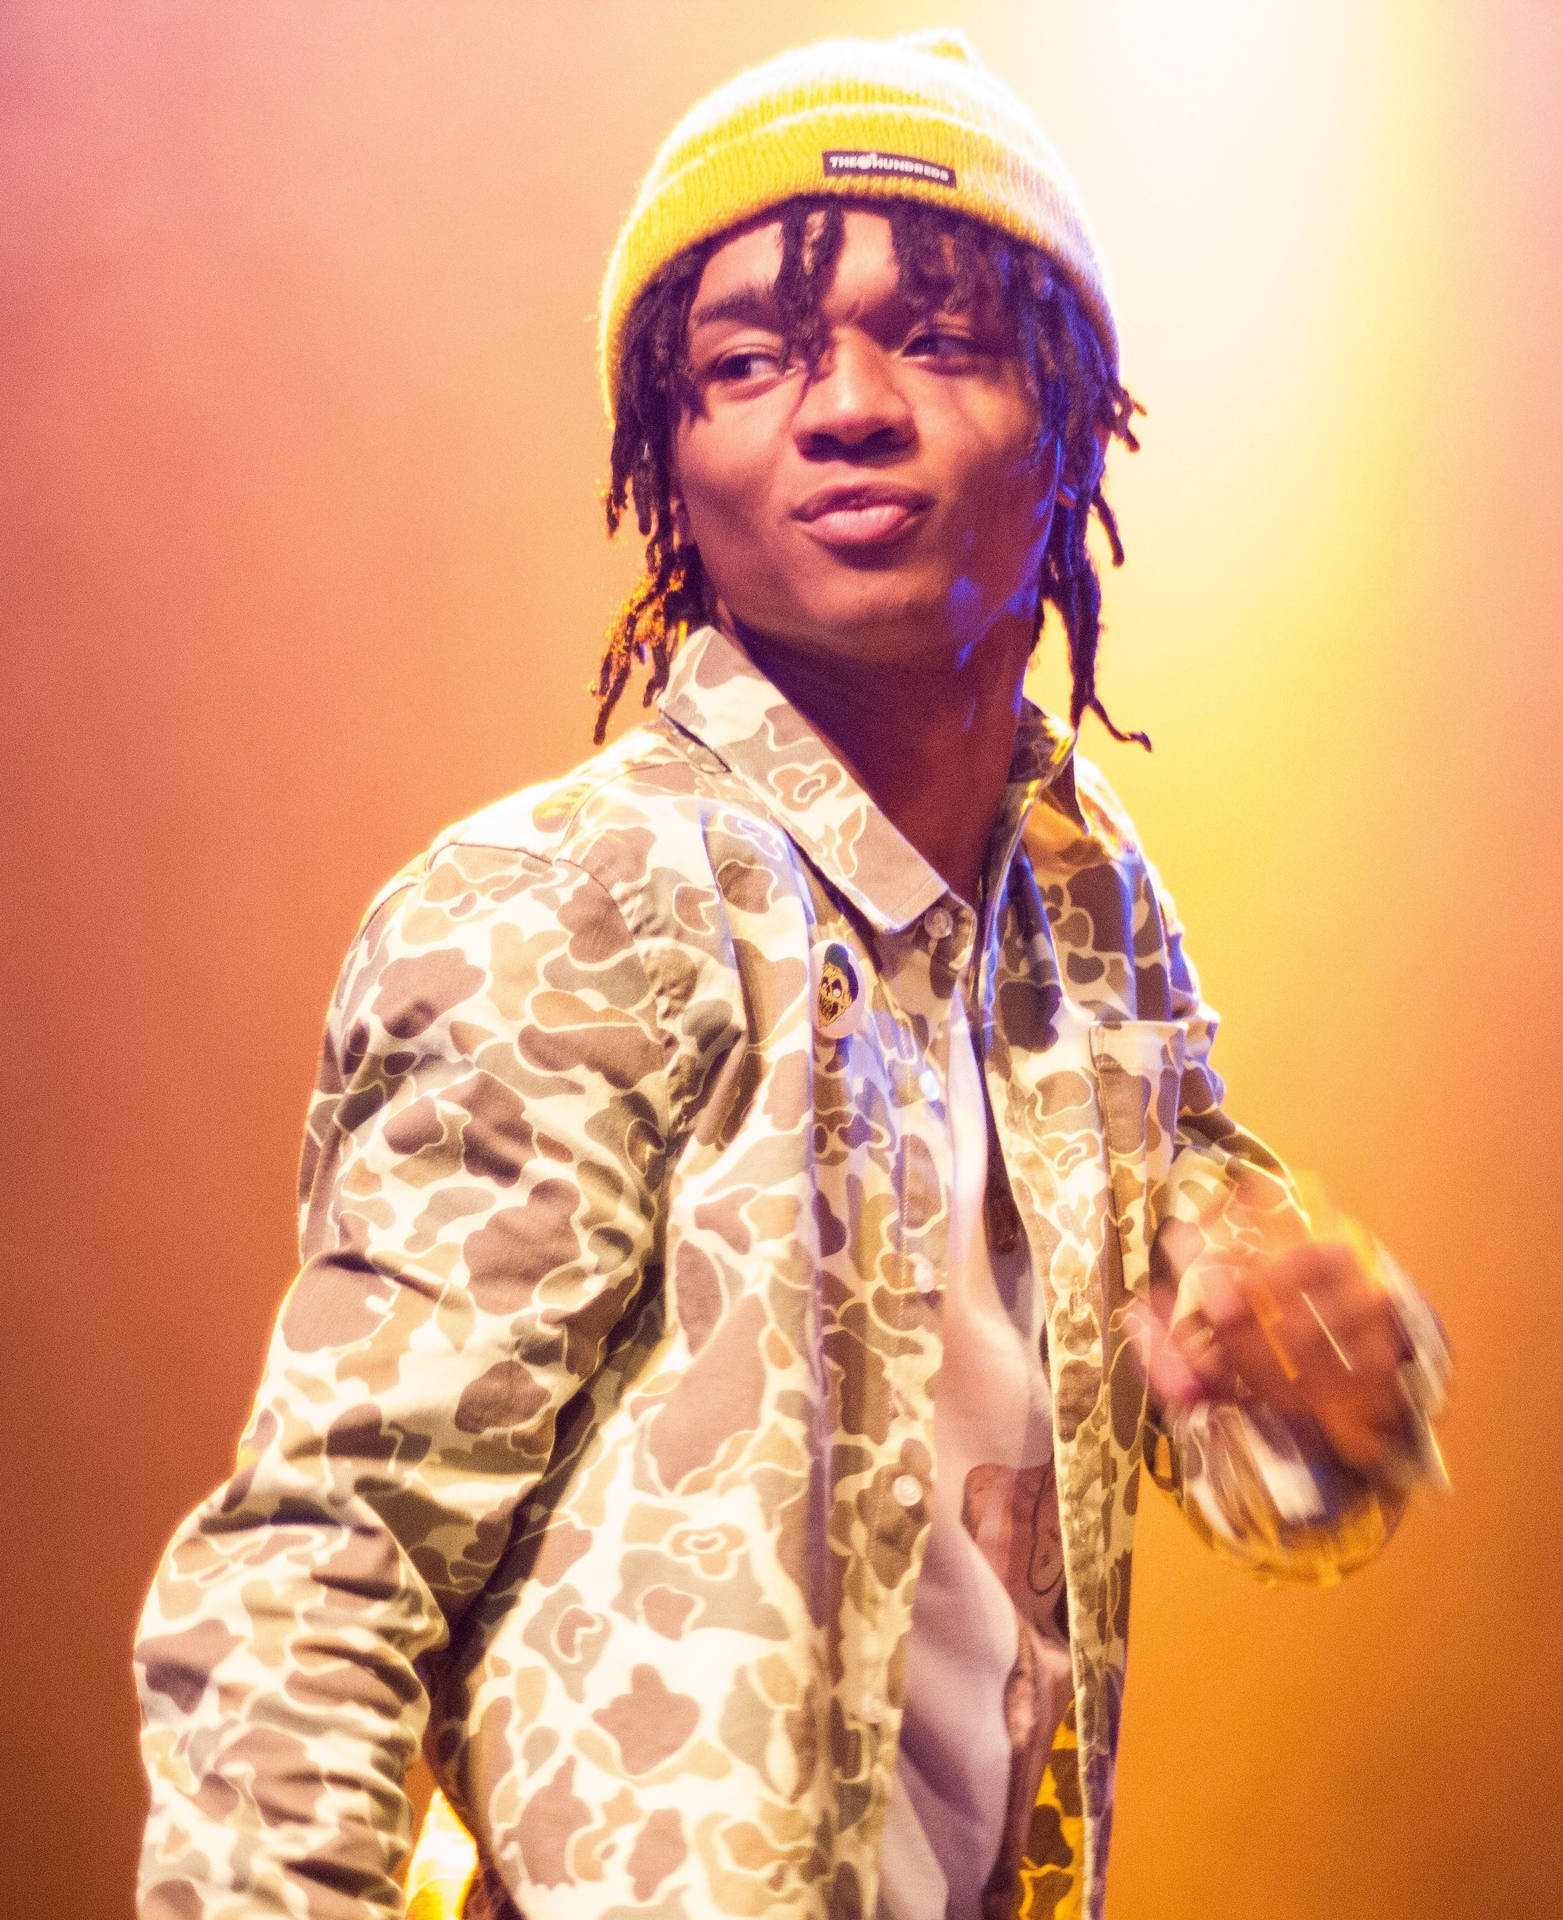 Swae Lee In The Light Background